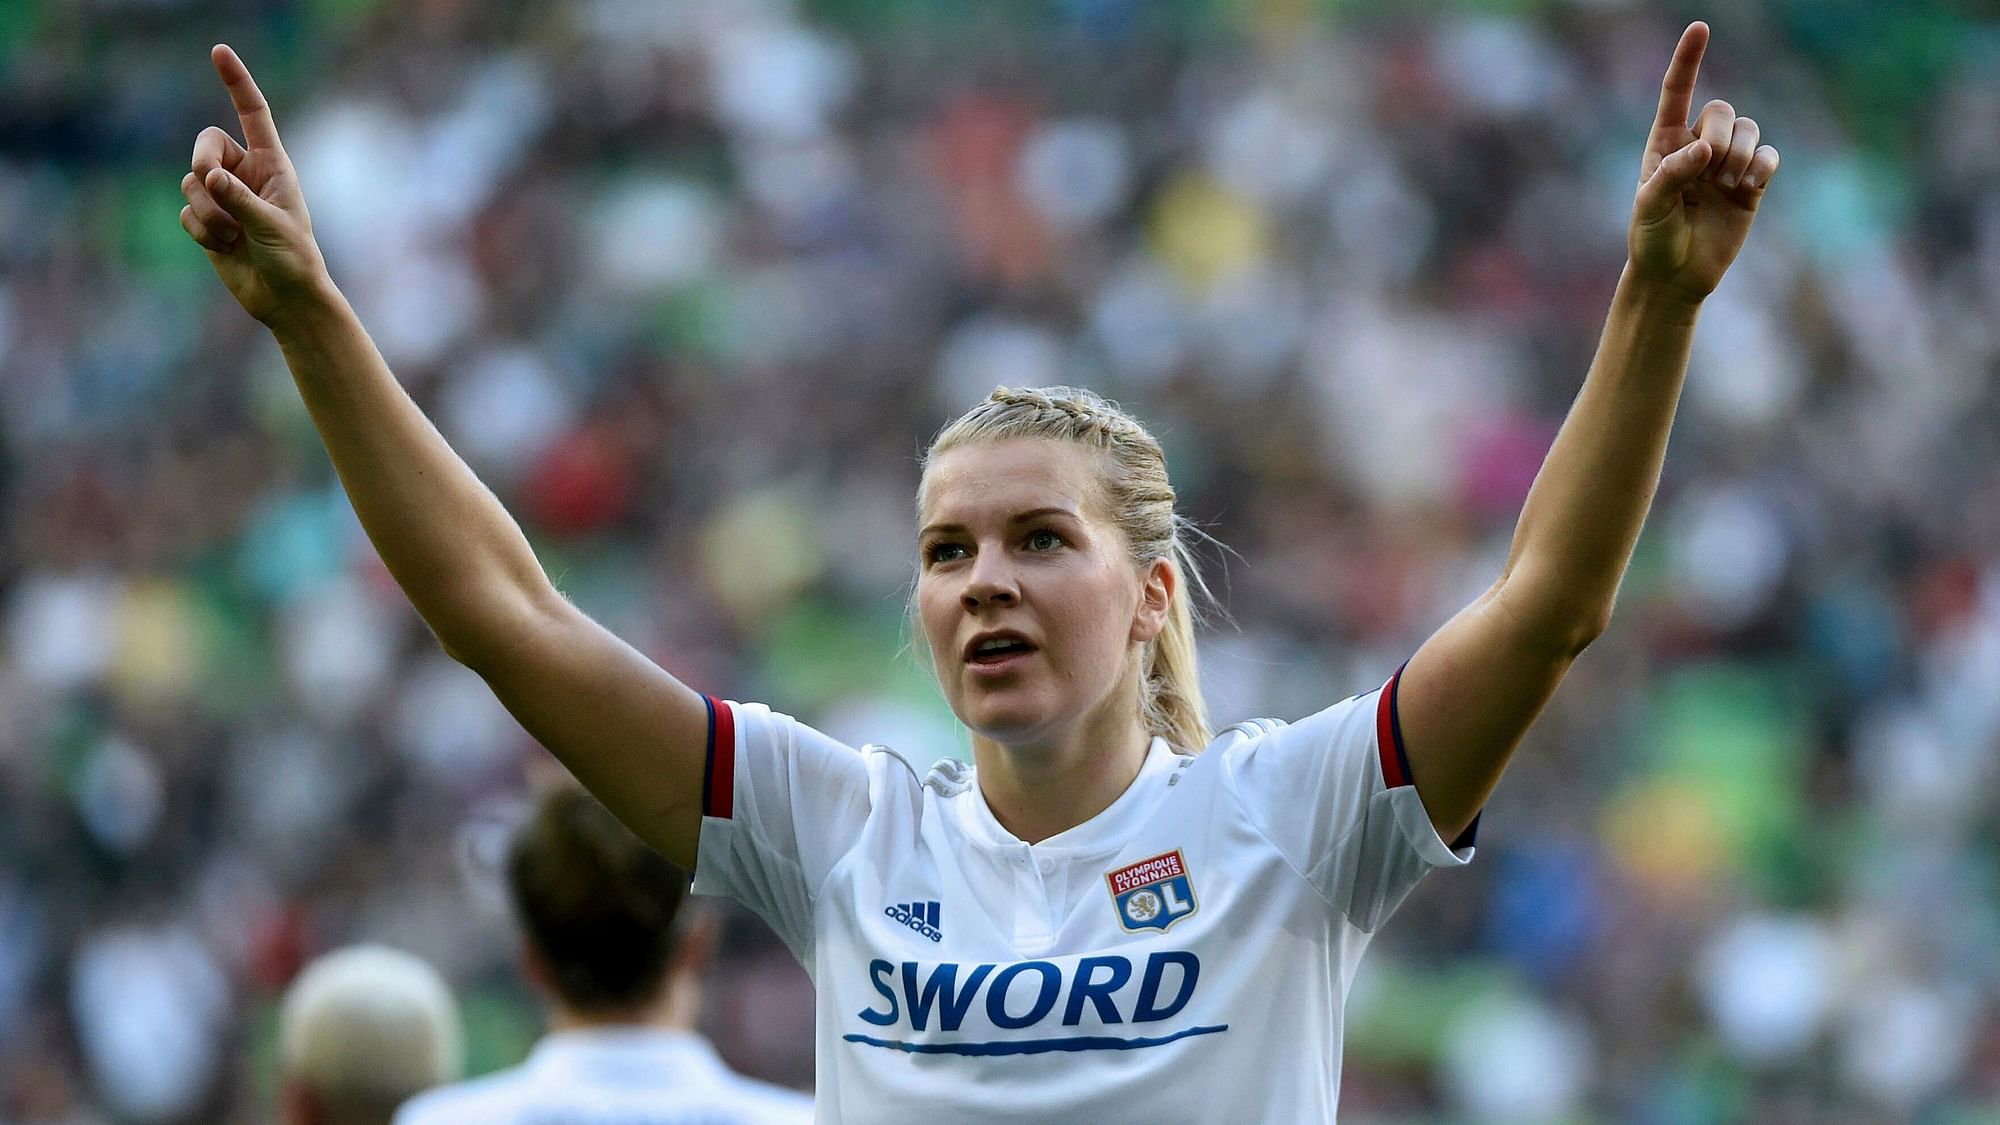 Ada Hegerberg leads the fight against stereotypes.